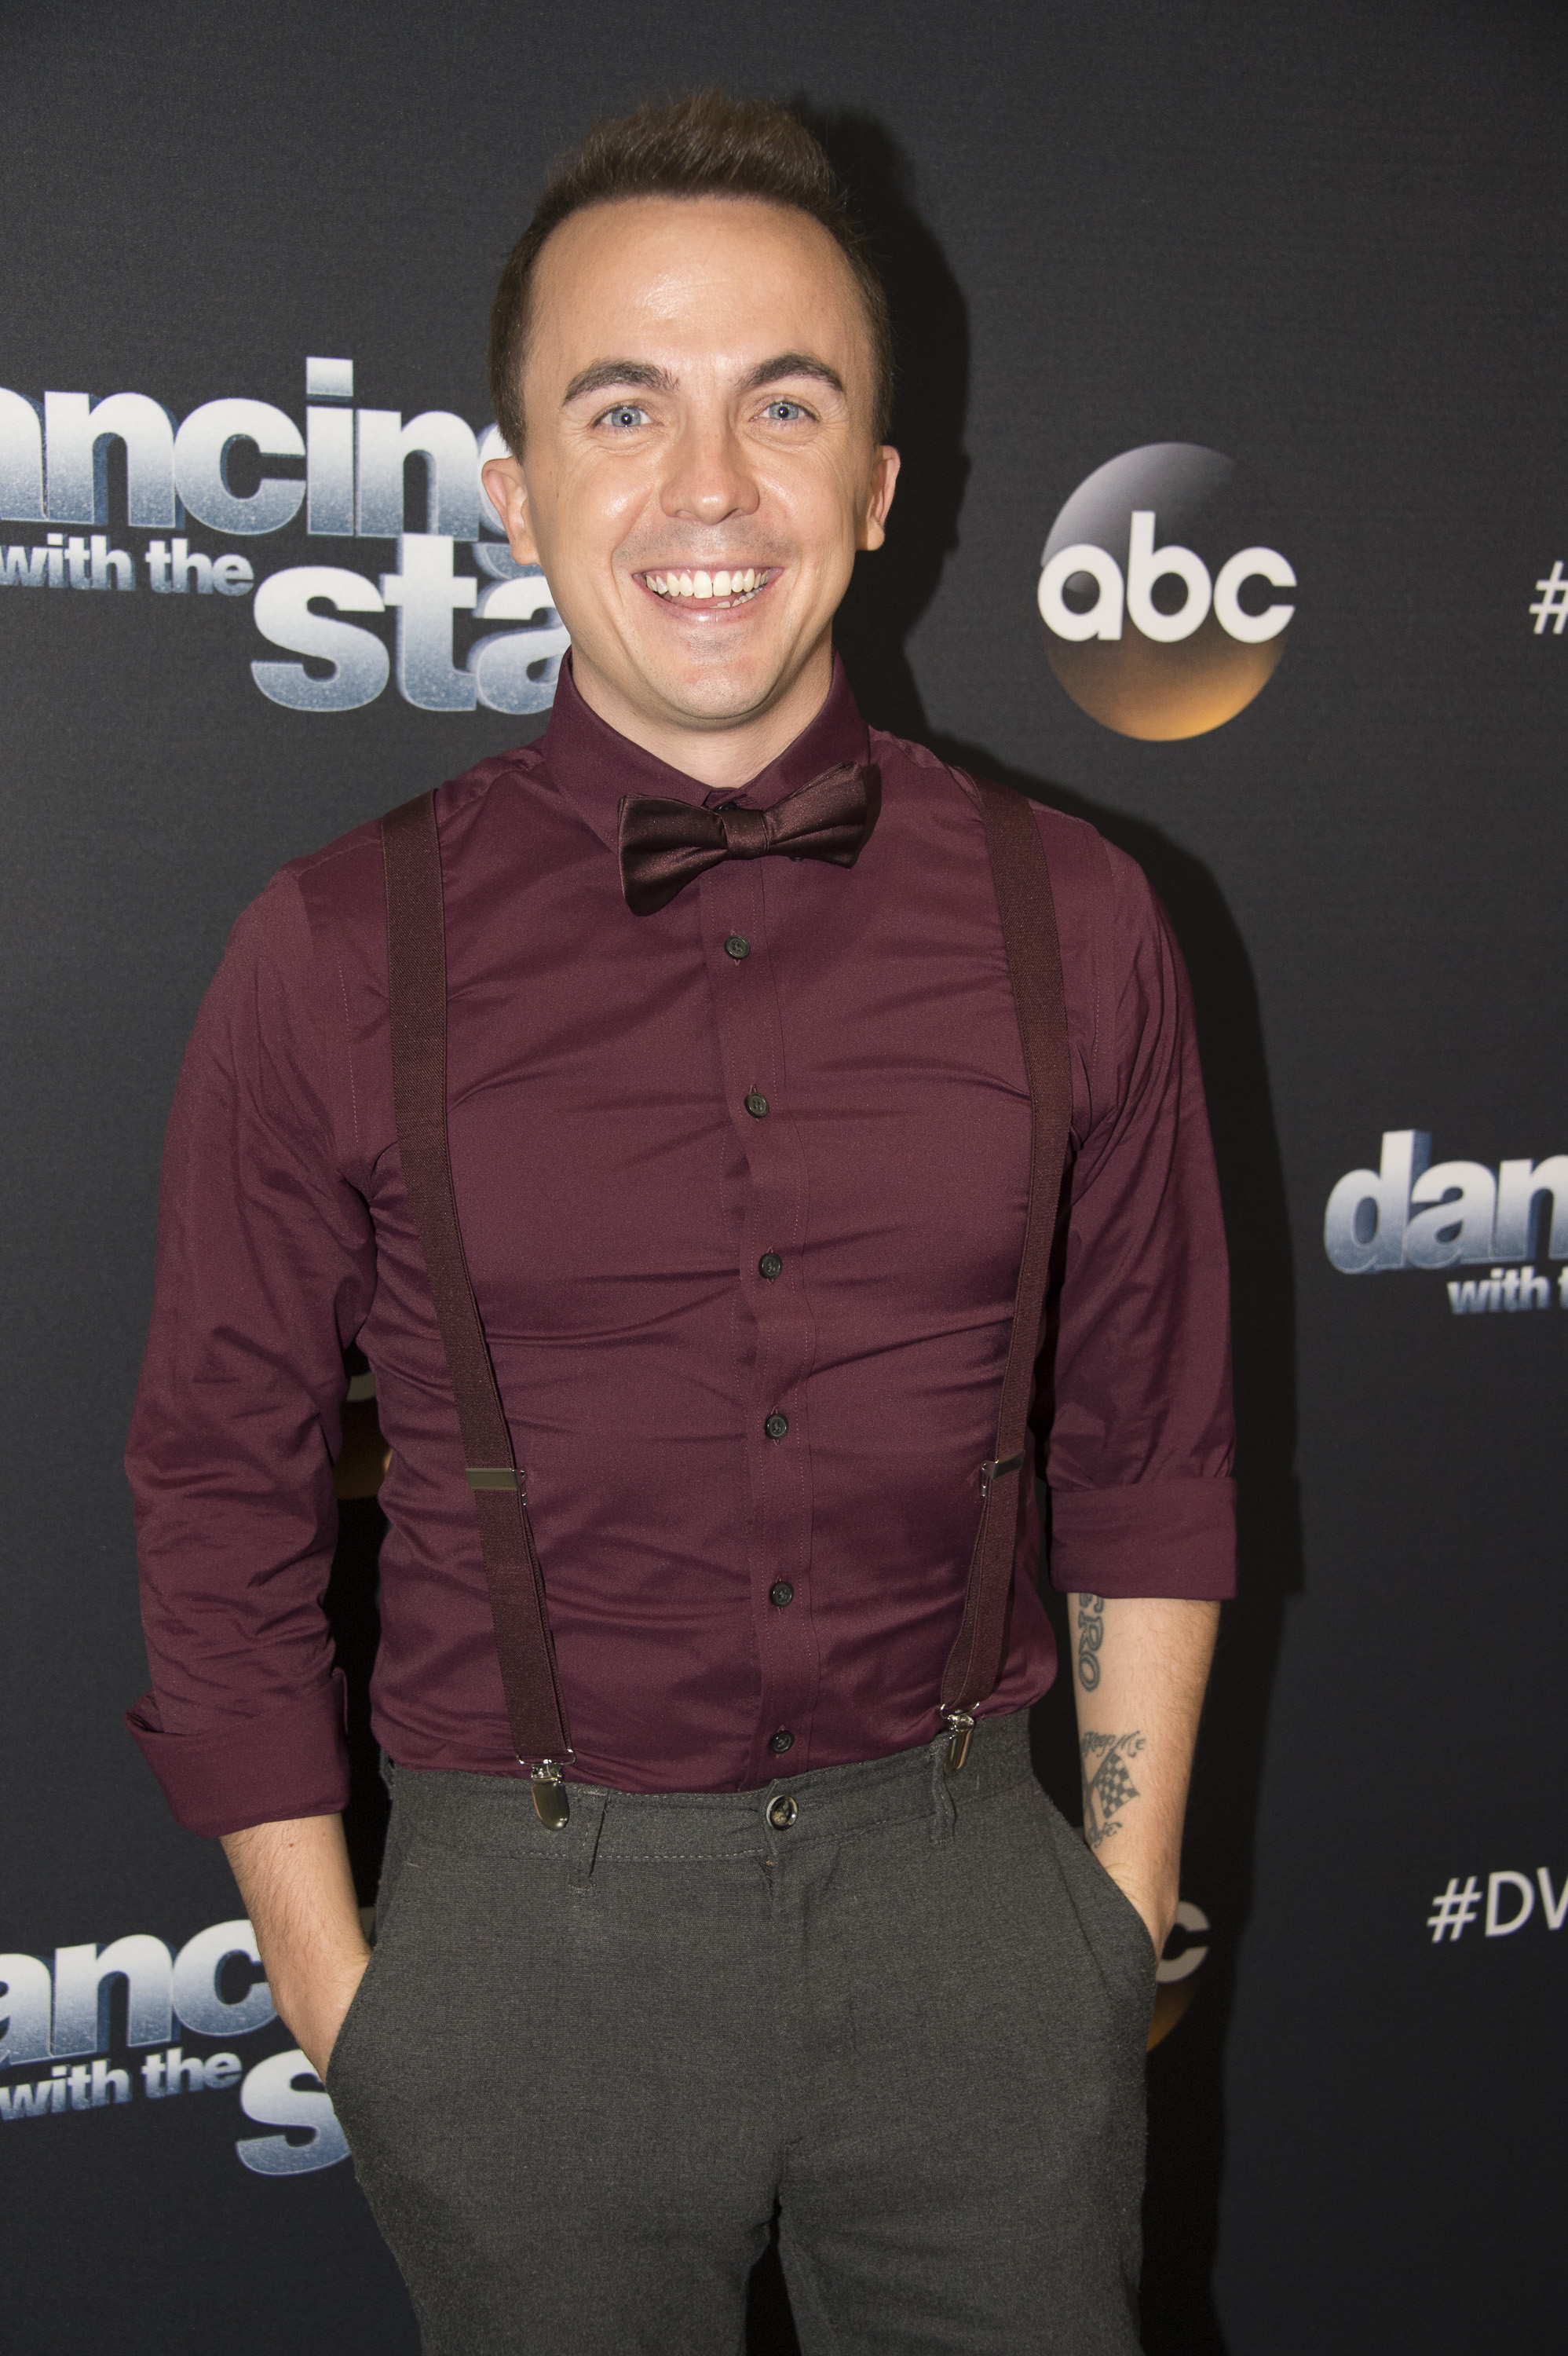 Frankie Muniz during ABC's "Dancing With the Stars" on October 1, 2018 in Los Angeles, California | Source: Getty Images